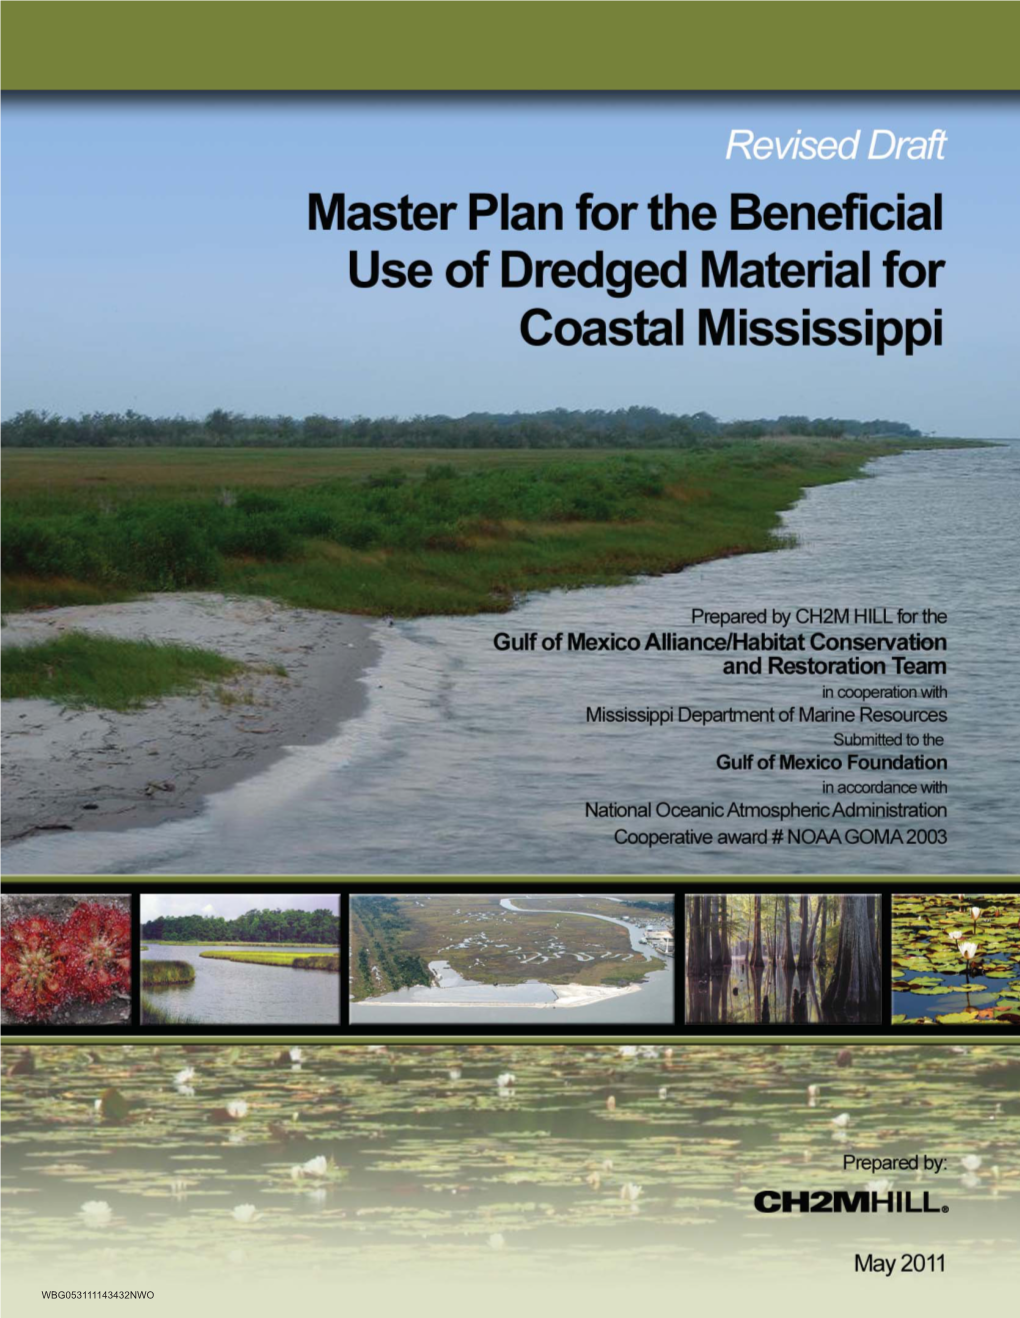 Beneficial Uses of Dredged Material Along Coastal Mississippi” (Master Plan) Which Was Contracted by the U.S